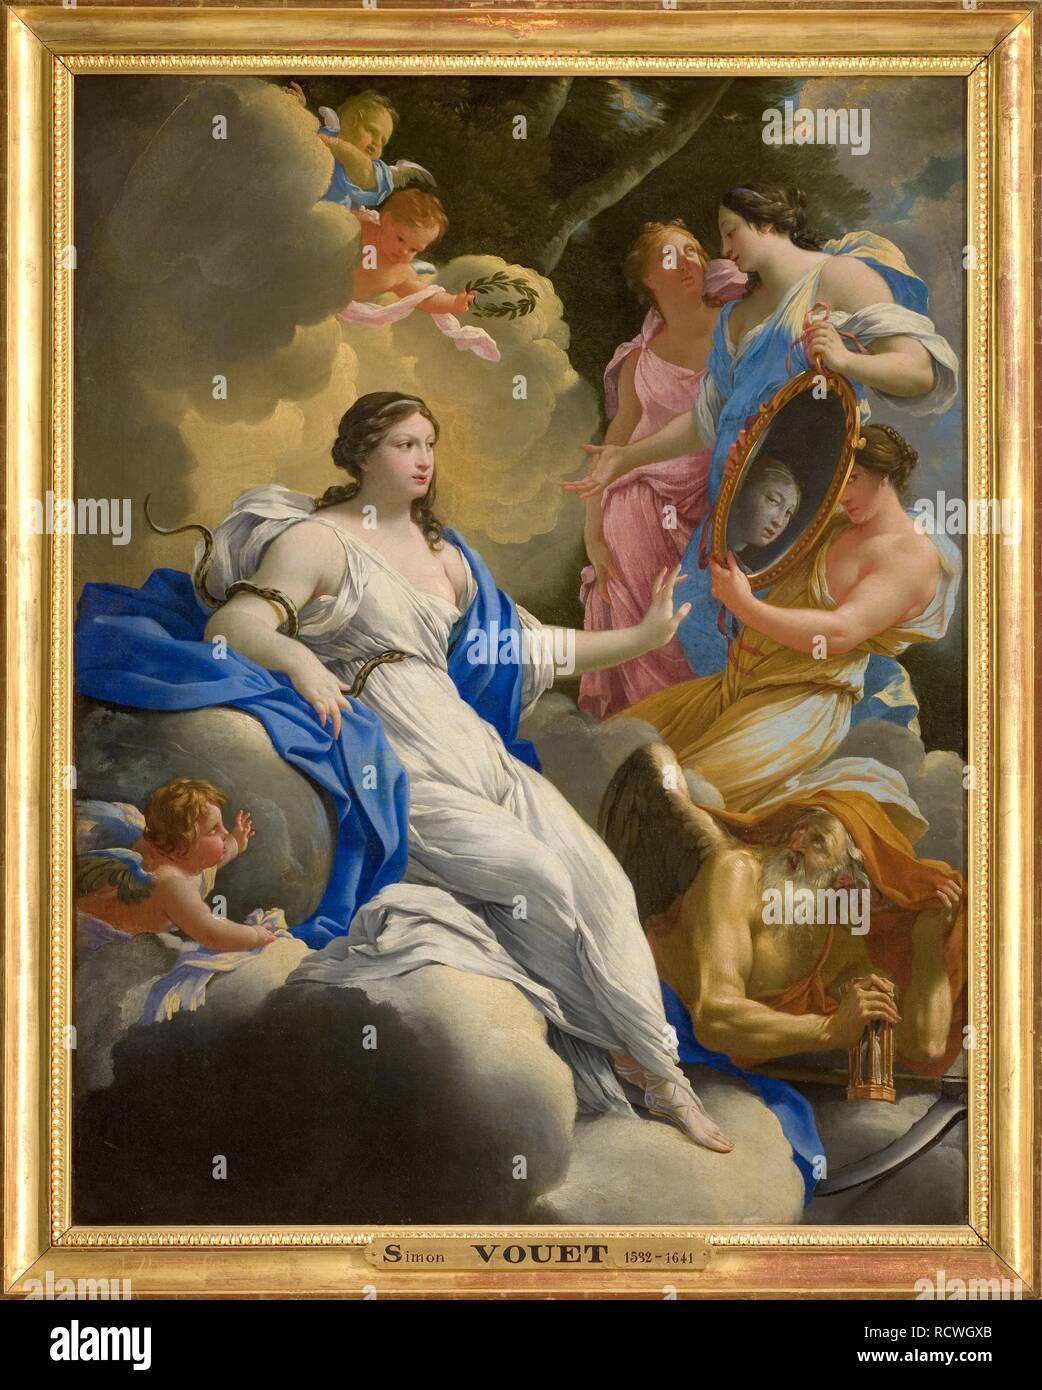 Allegory of Prudence. Museum: Musée Fabre, Montpellier. Author: VOUET, SIMON. Stock Photo